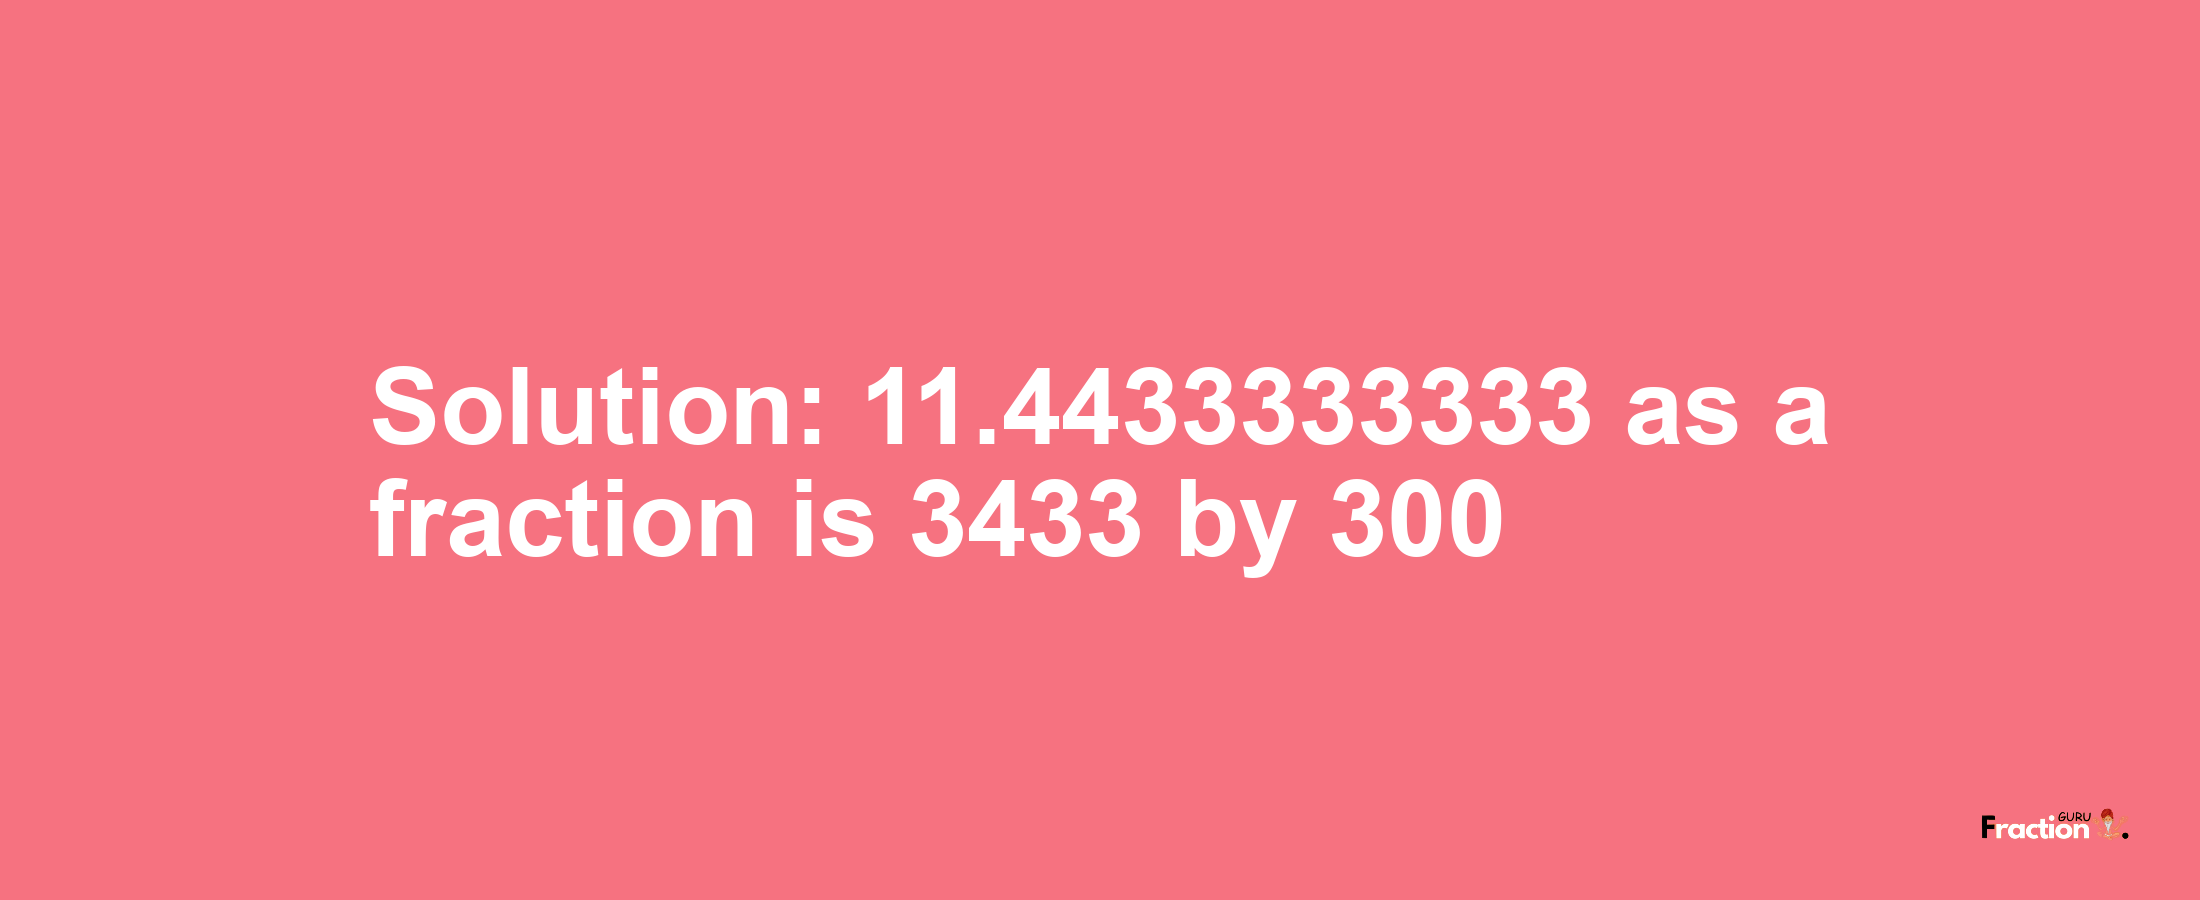 Solution:11.4433333333 as a fraction is 3433/300